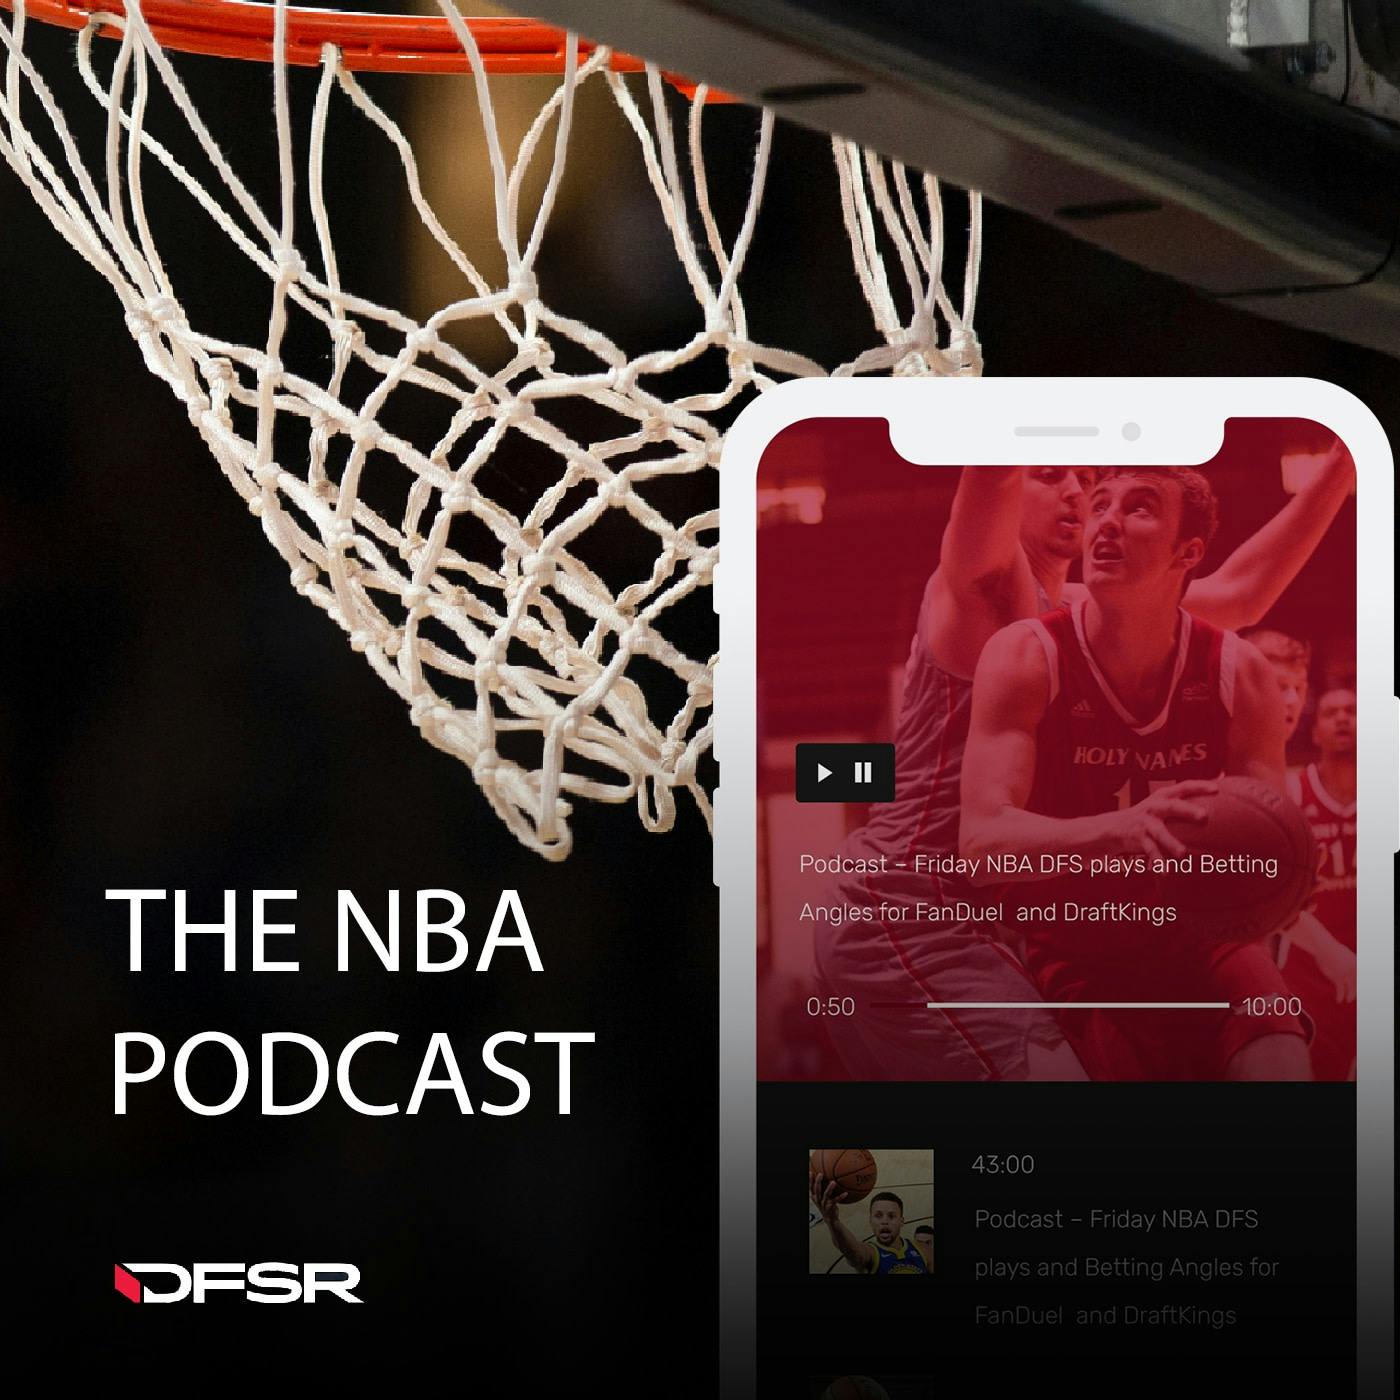 DFS NBA Podcast for FanDuel and DraftKings - 11/6/17